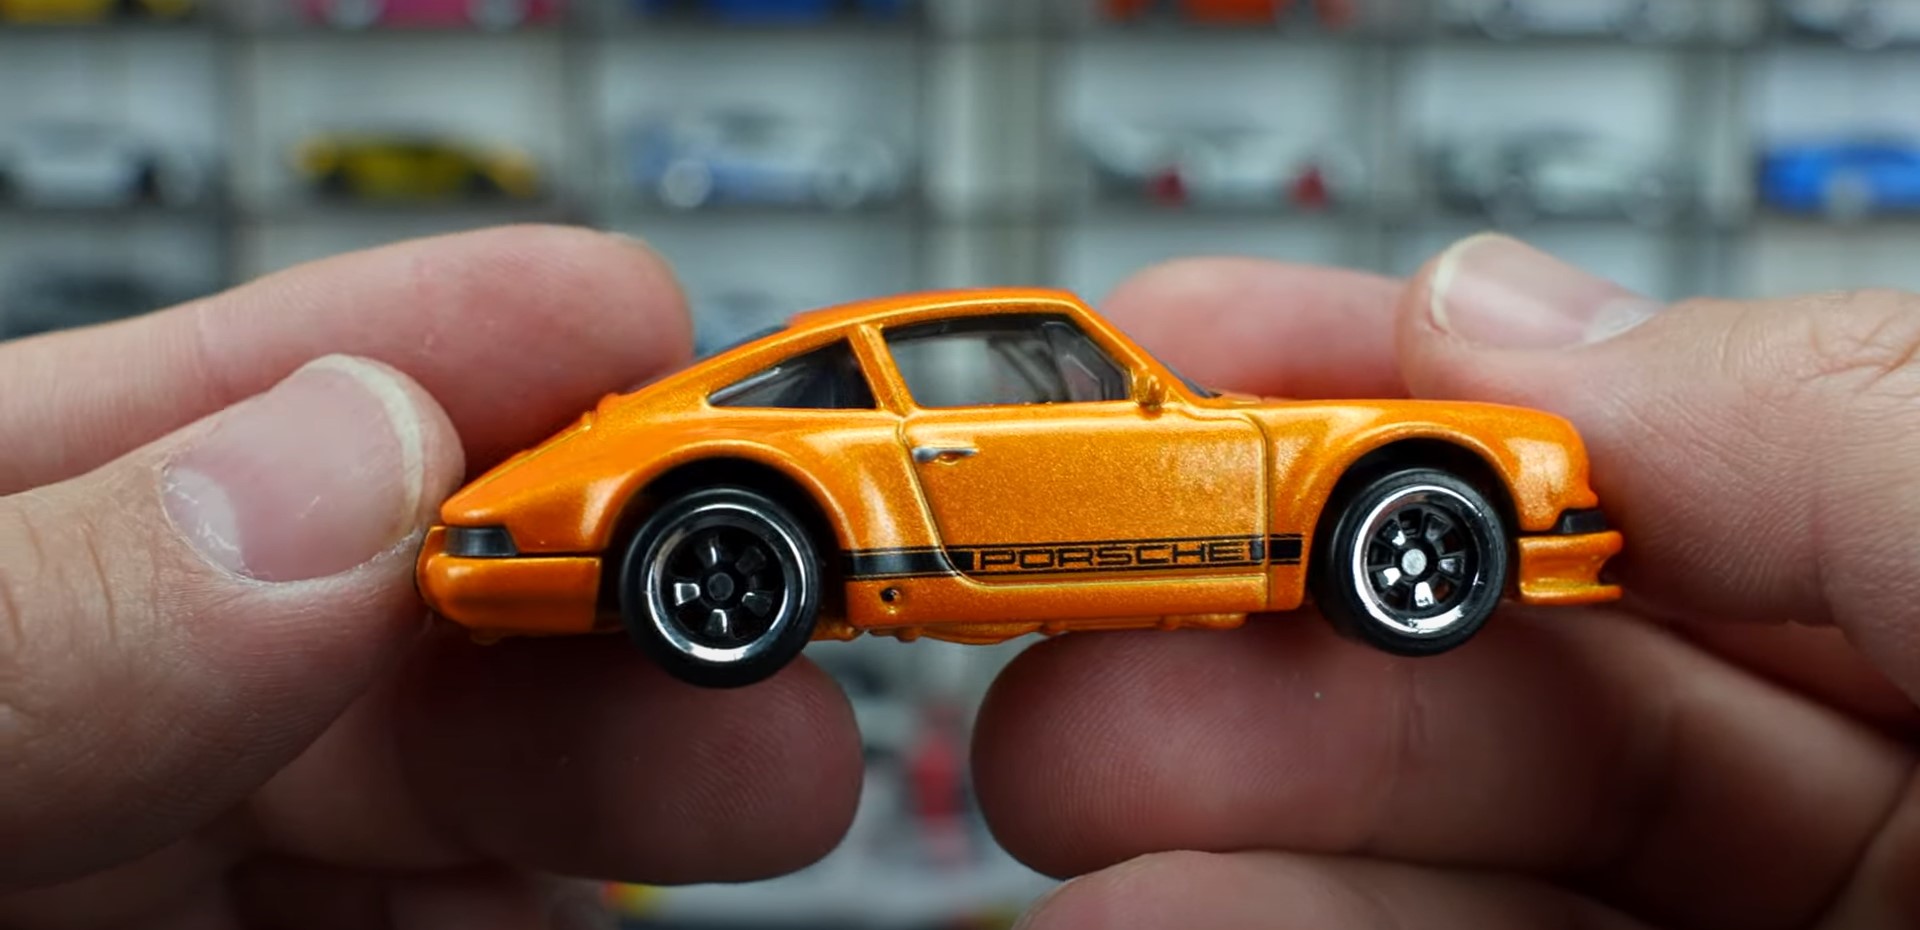 How To Organize Hot Wheels